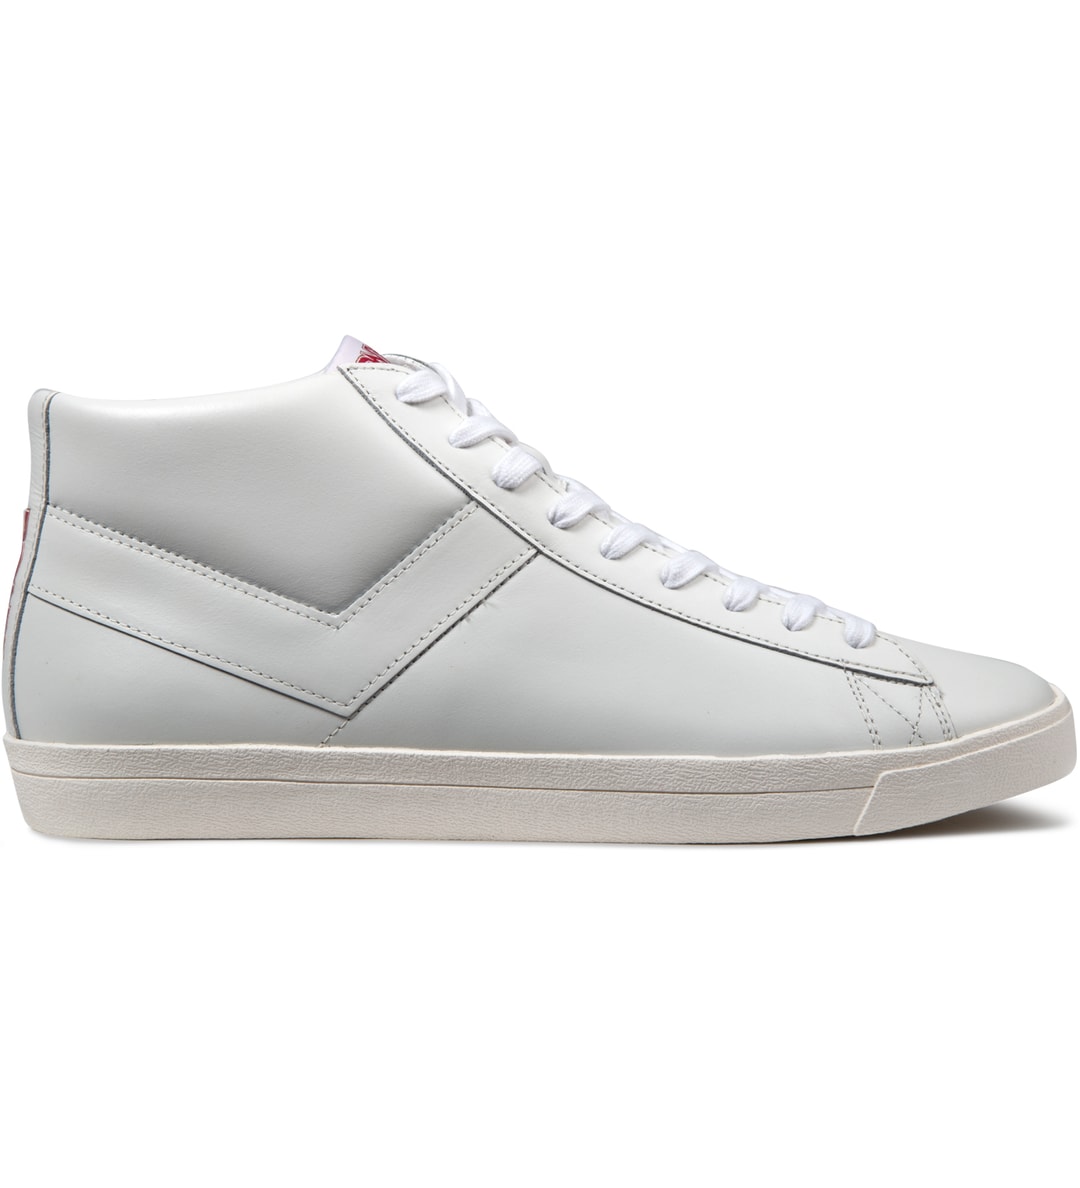 PONY - White/White Perf Topstar Hi Leather Sneakers | HBX - Globally ...